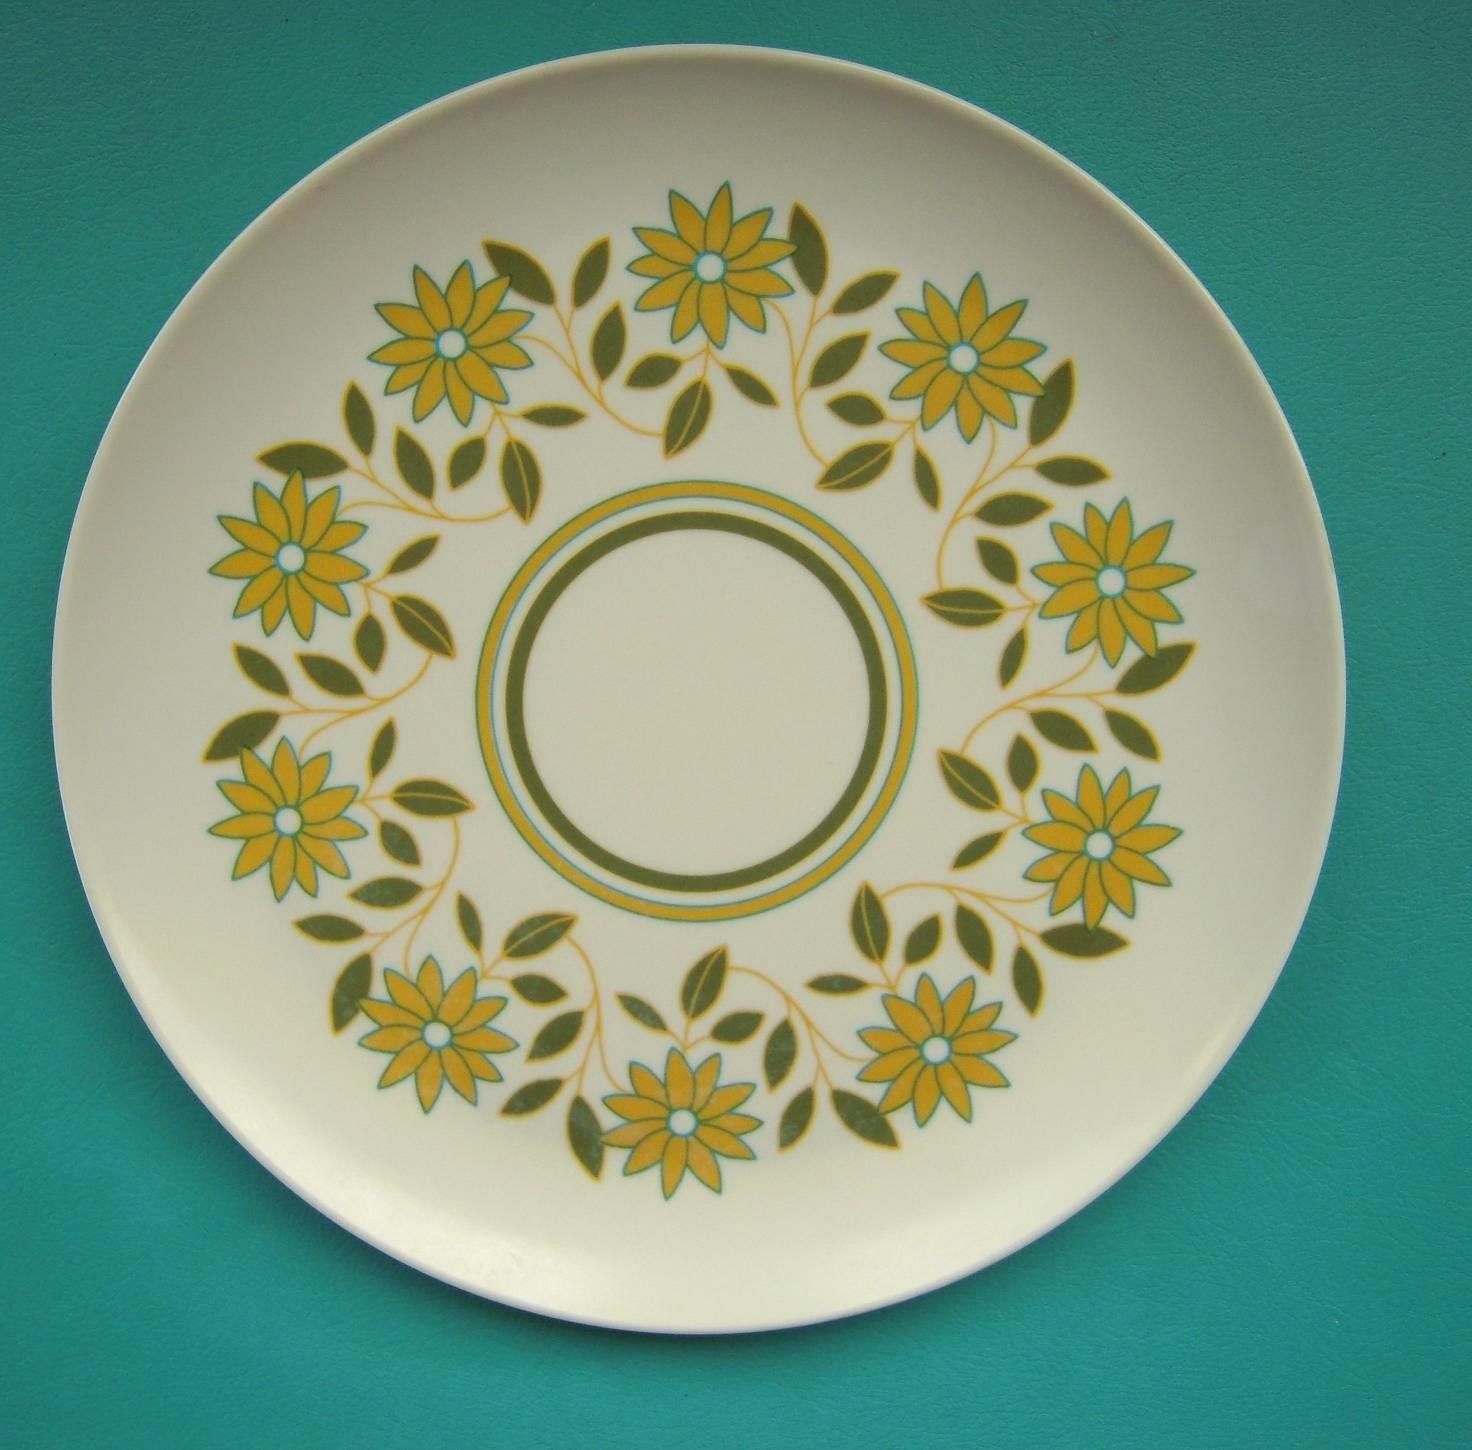 adorable melmac plates, perfect for a summer table setting!